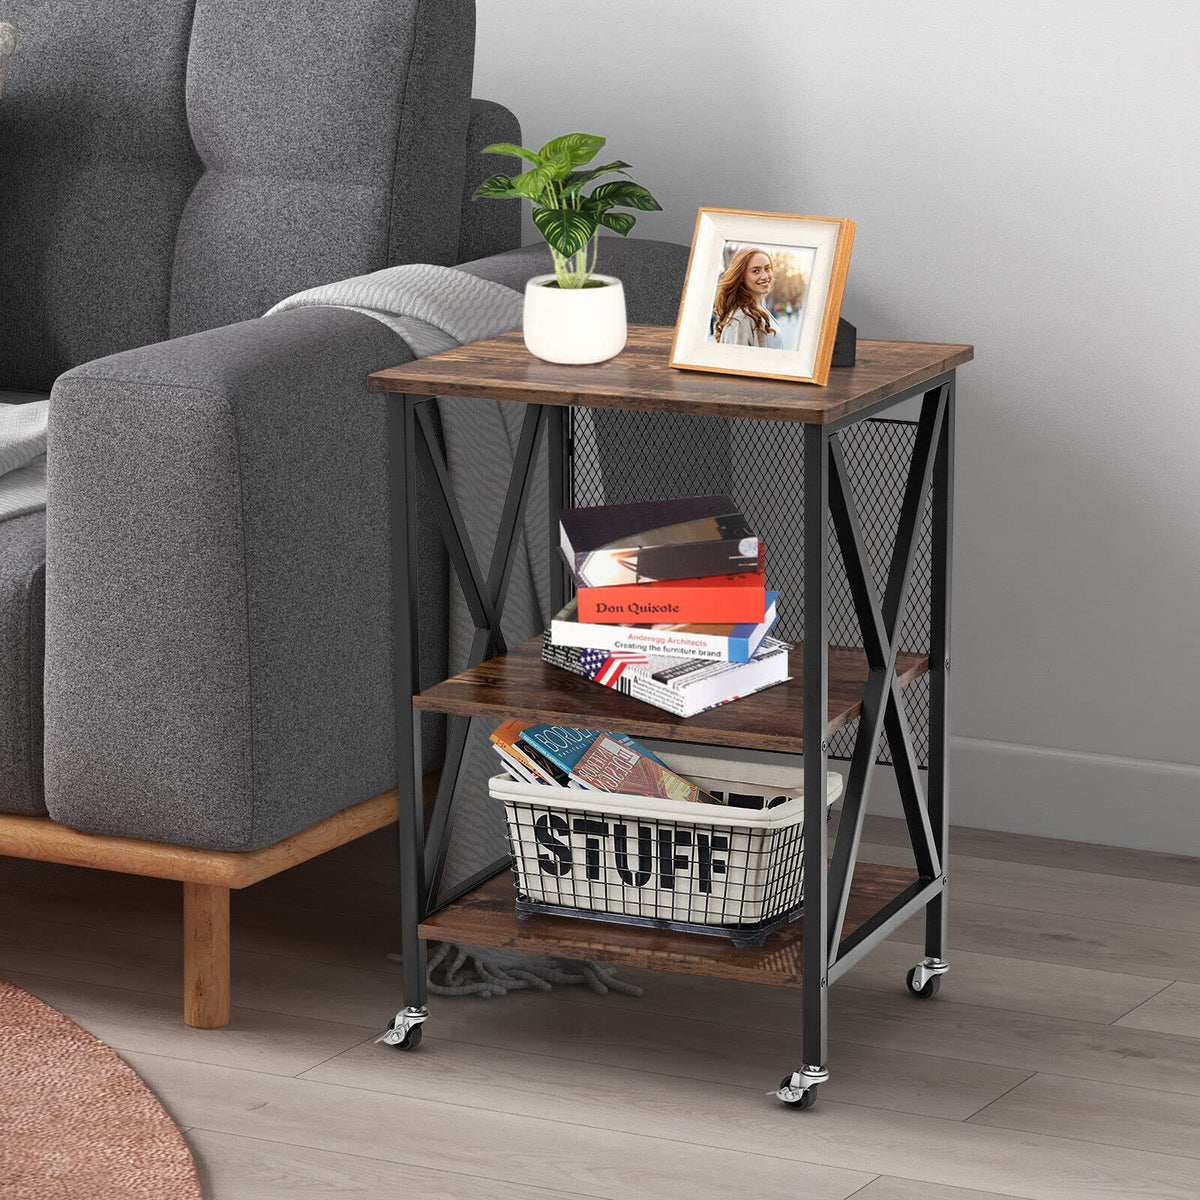 Giantex 3-Tier End Table, Rolling Turntable Stand, Rustic Vinyl Record Storage Holder w/ 3 Dividers for Albums